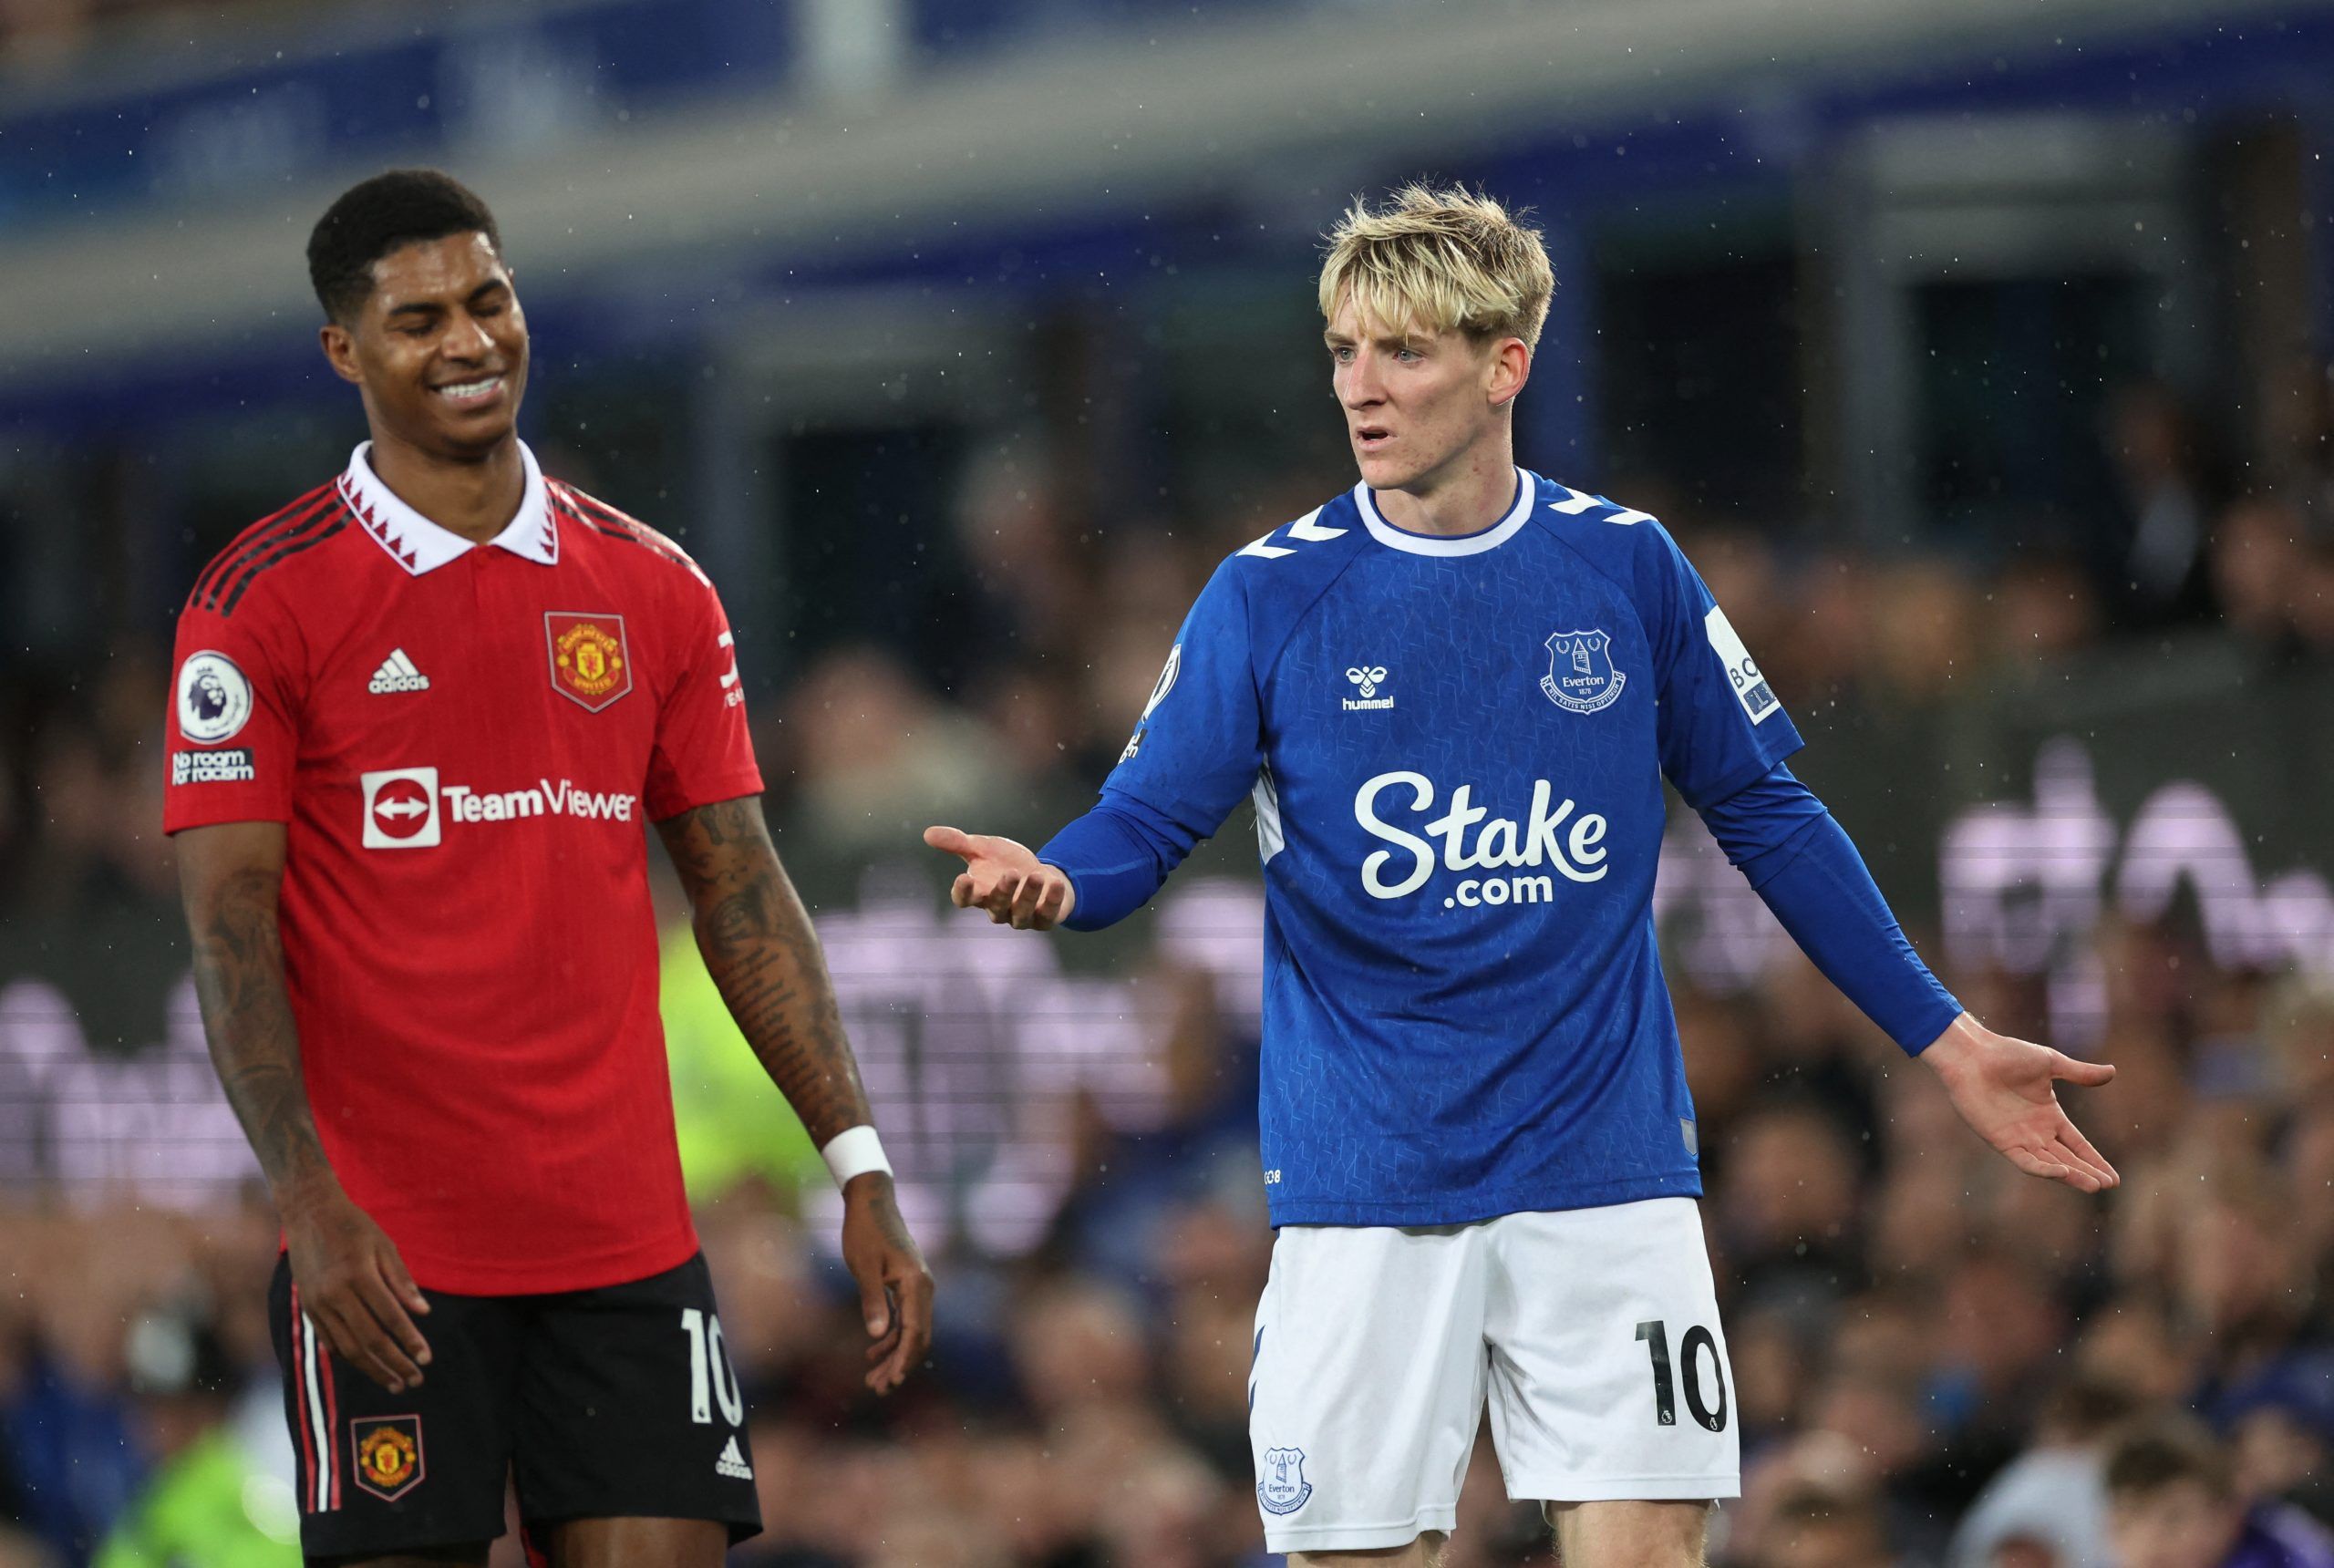 Soccer Football - Premier League - Everton v Manchester United - Goodison Park, Liverpool, Britain - October 9, 2022 Everton's Anthony Gordon and Manchester United's Marcus Rashford react Action Images via Reuters/Carl Recine EDITORIAL USE ONLY. No use with unauthorized audio, video, data, fixture lists, club/league logos or 'live' services. Online in-match use limited to 75 images, no video emulation. No use in betting, games or single club /league/player publications.  Please contact your acco